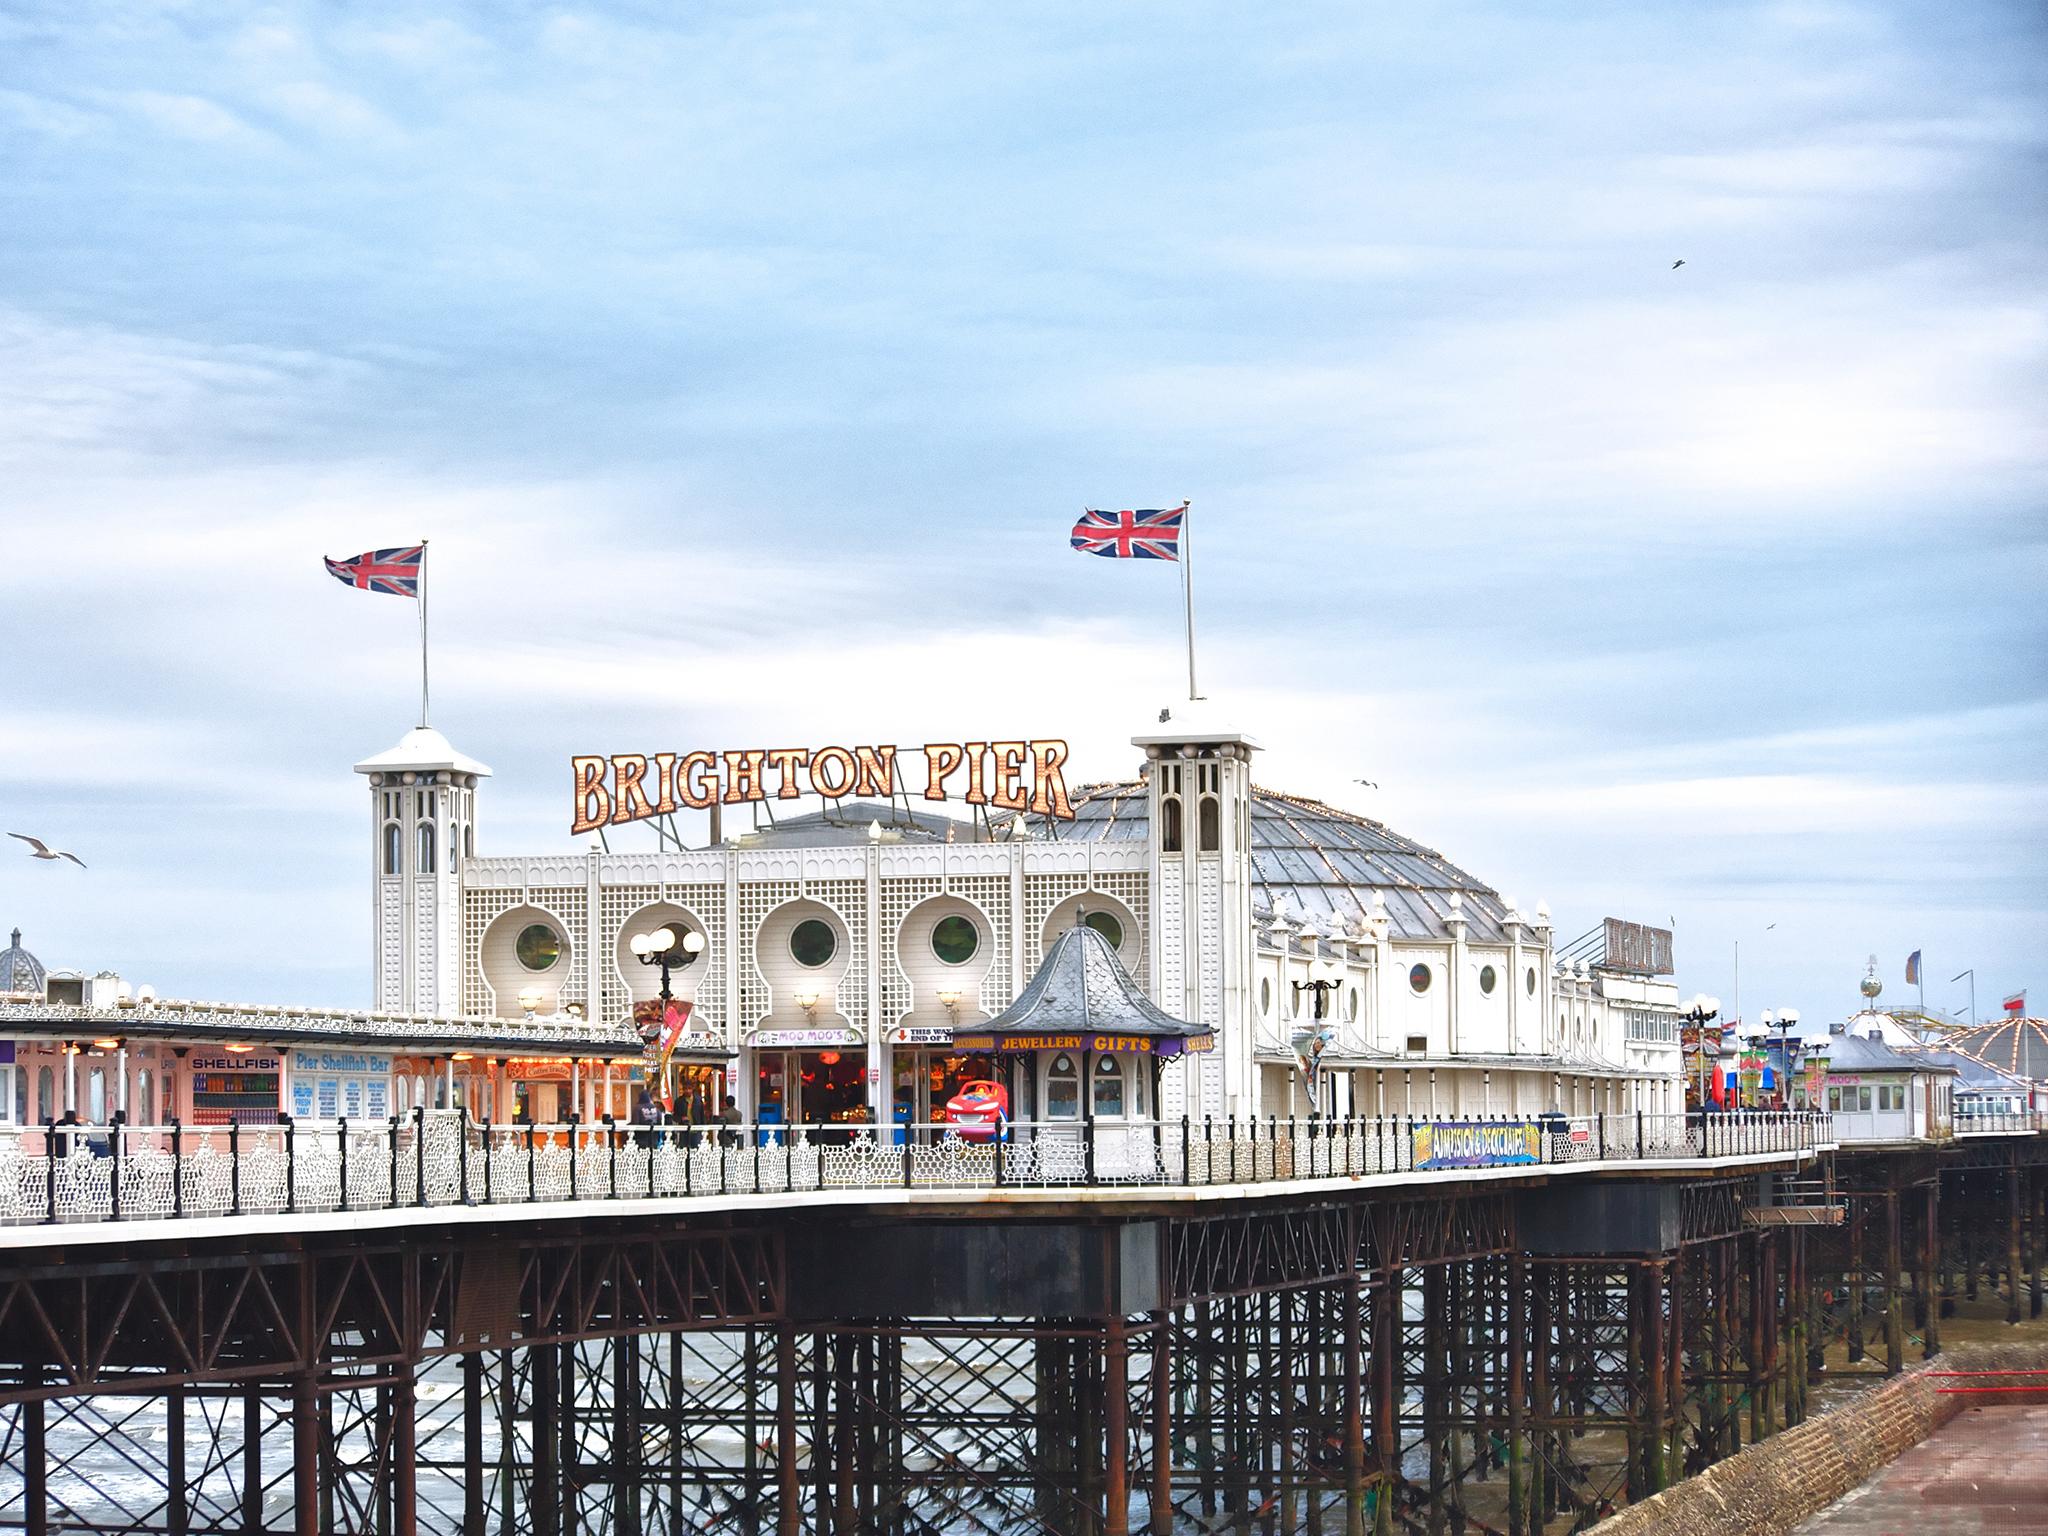 Have a flutter while you're cantilevered over the water on Brighton Pier